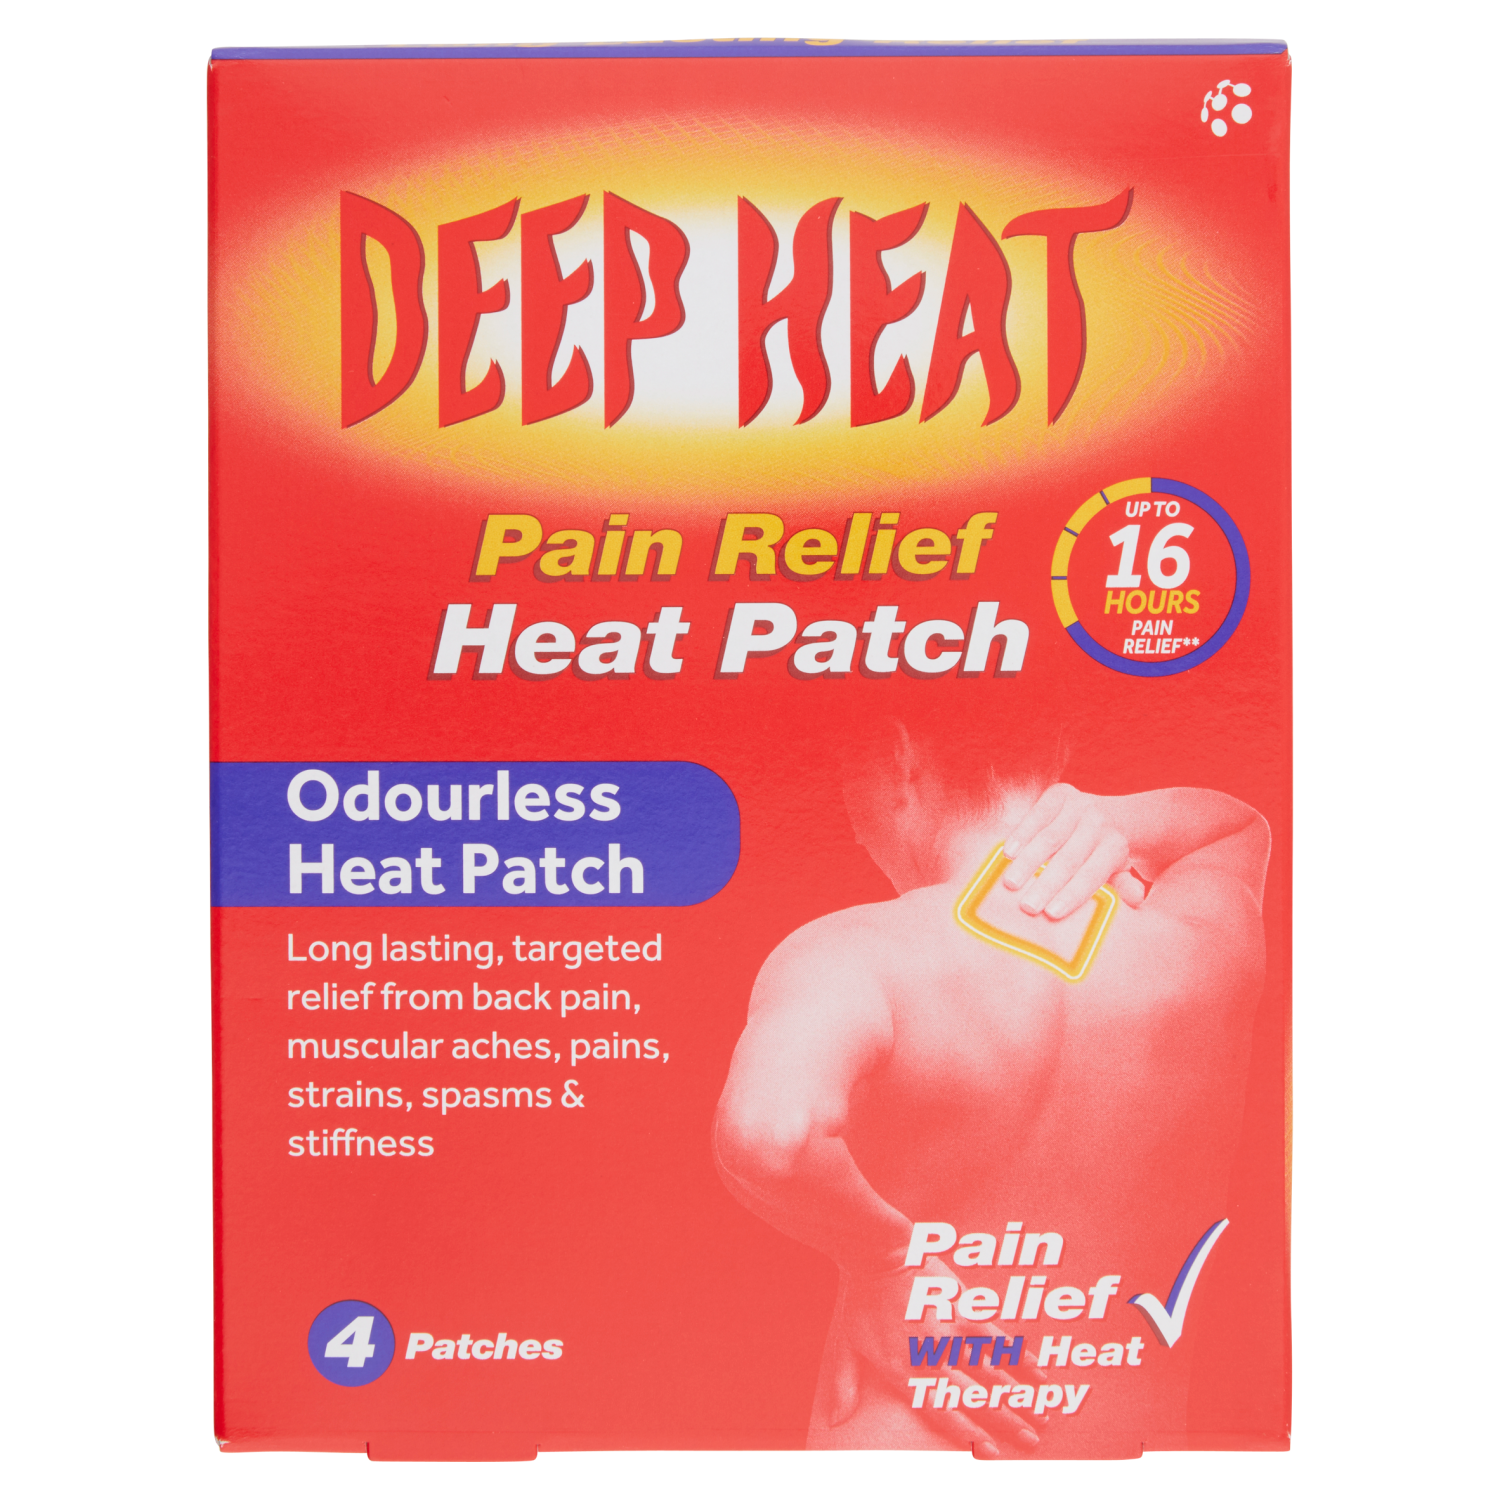 Deep Heat Pain Relief Heat Patch (4 Patches)